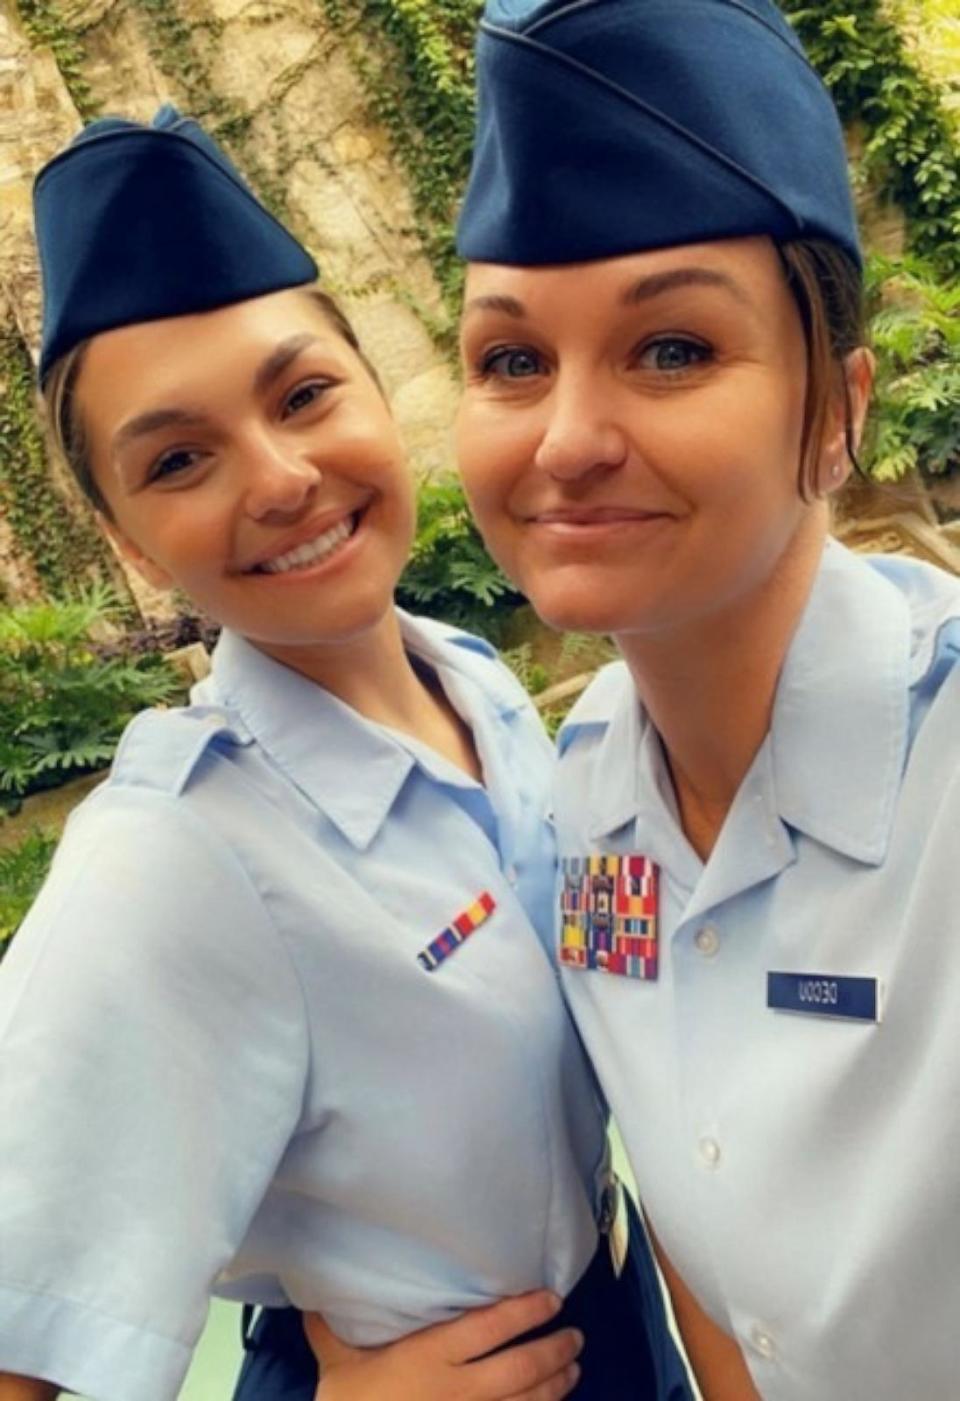 PHOTO: Senior Airman Jenaka DeCou said it has been “a really, really great blessing” to be deployed together with her mother, Senior Master Sergeant Jennifer DeCou. (Courtesy of Jennifer DeCou)